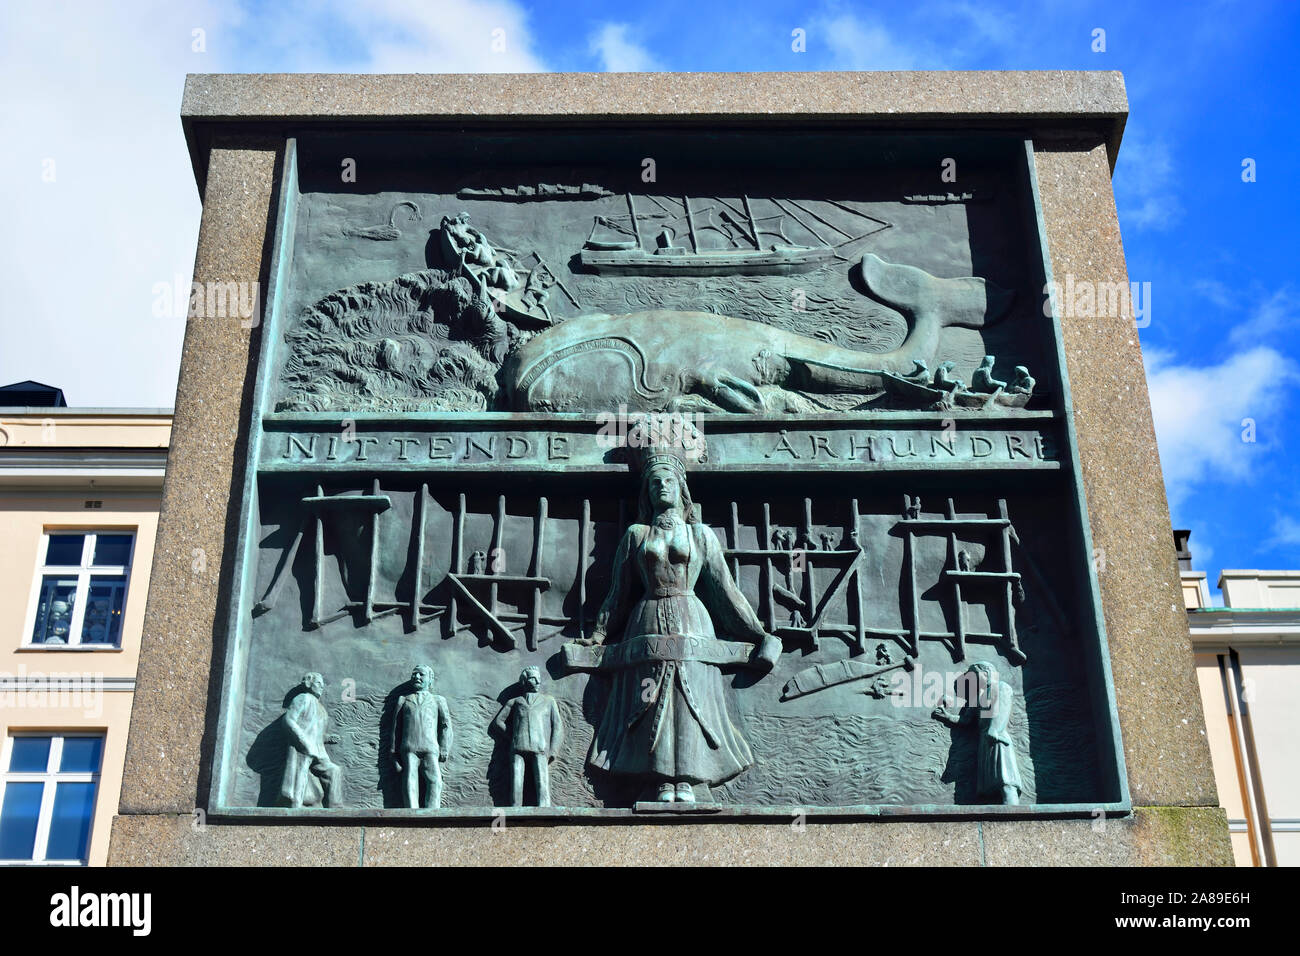 The Seamen's Monument, created by the sculptor Dyre Vaa, in honour of Norwegian Seamen's achievements through the ages. Bergen, Norway Stock Photo